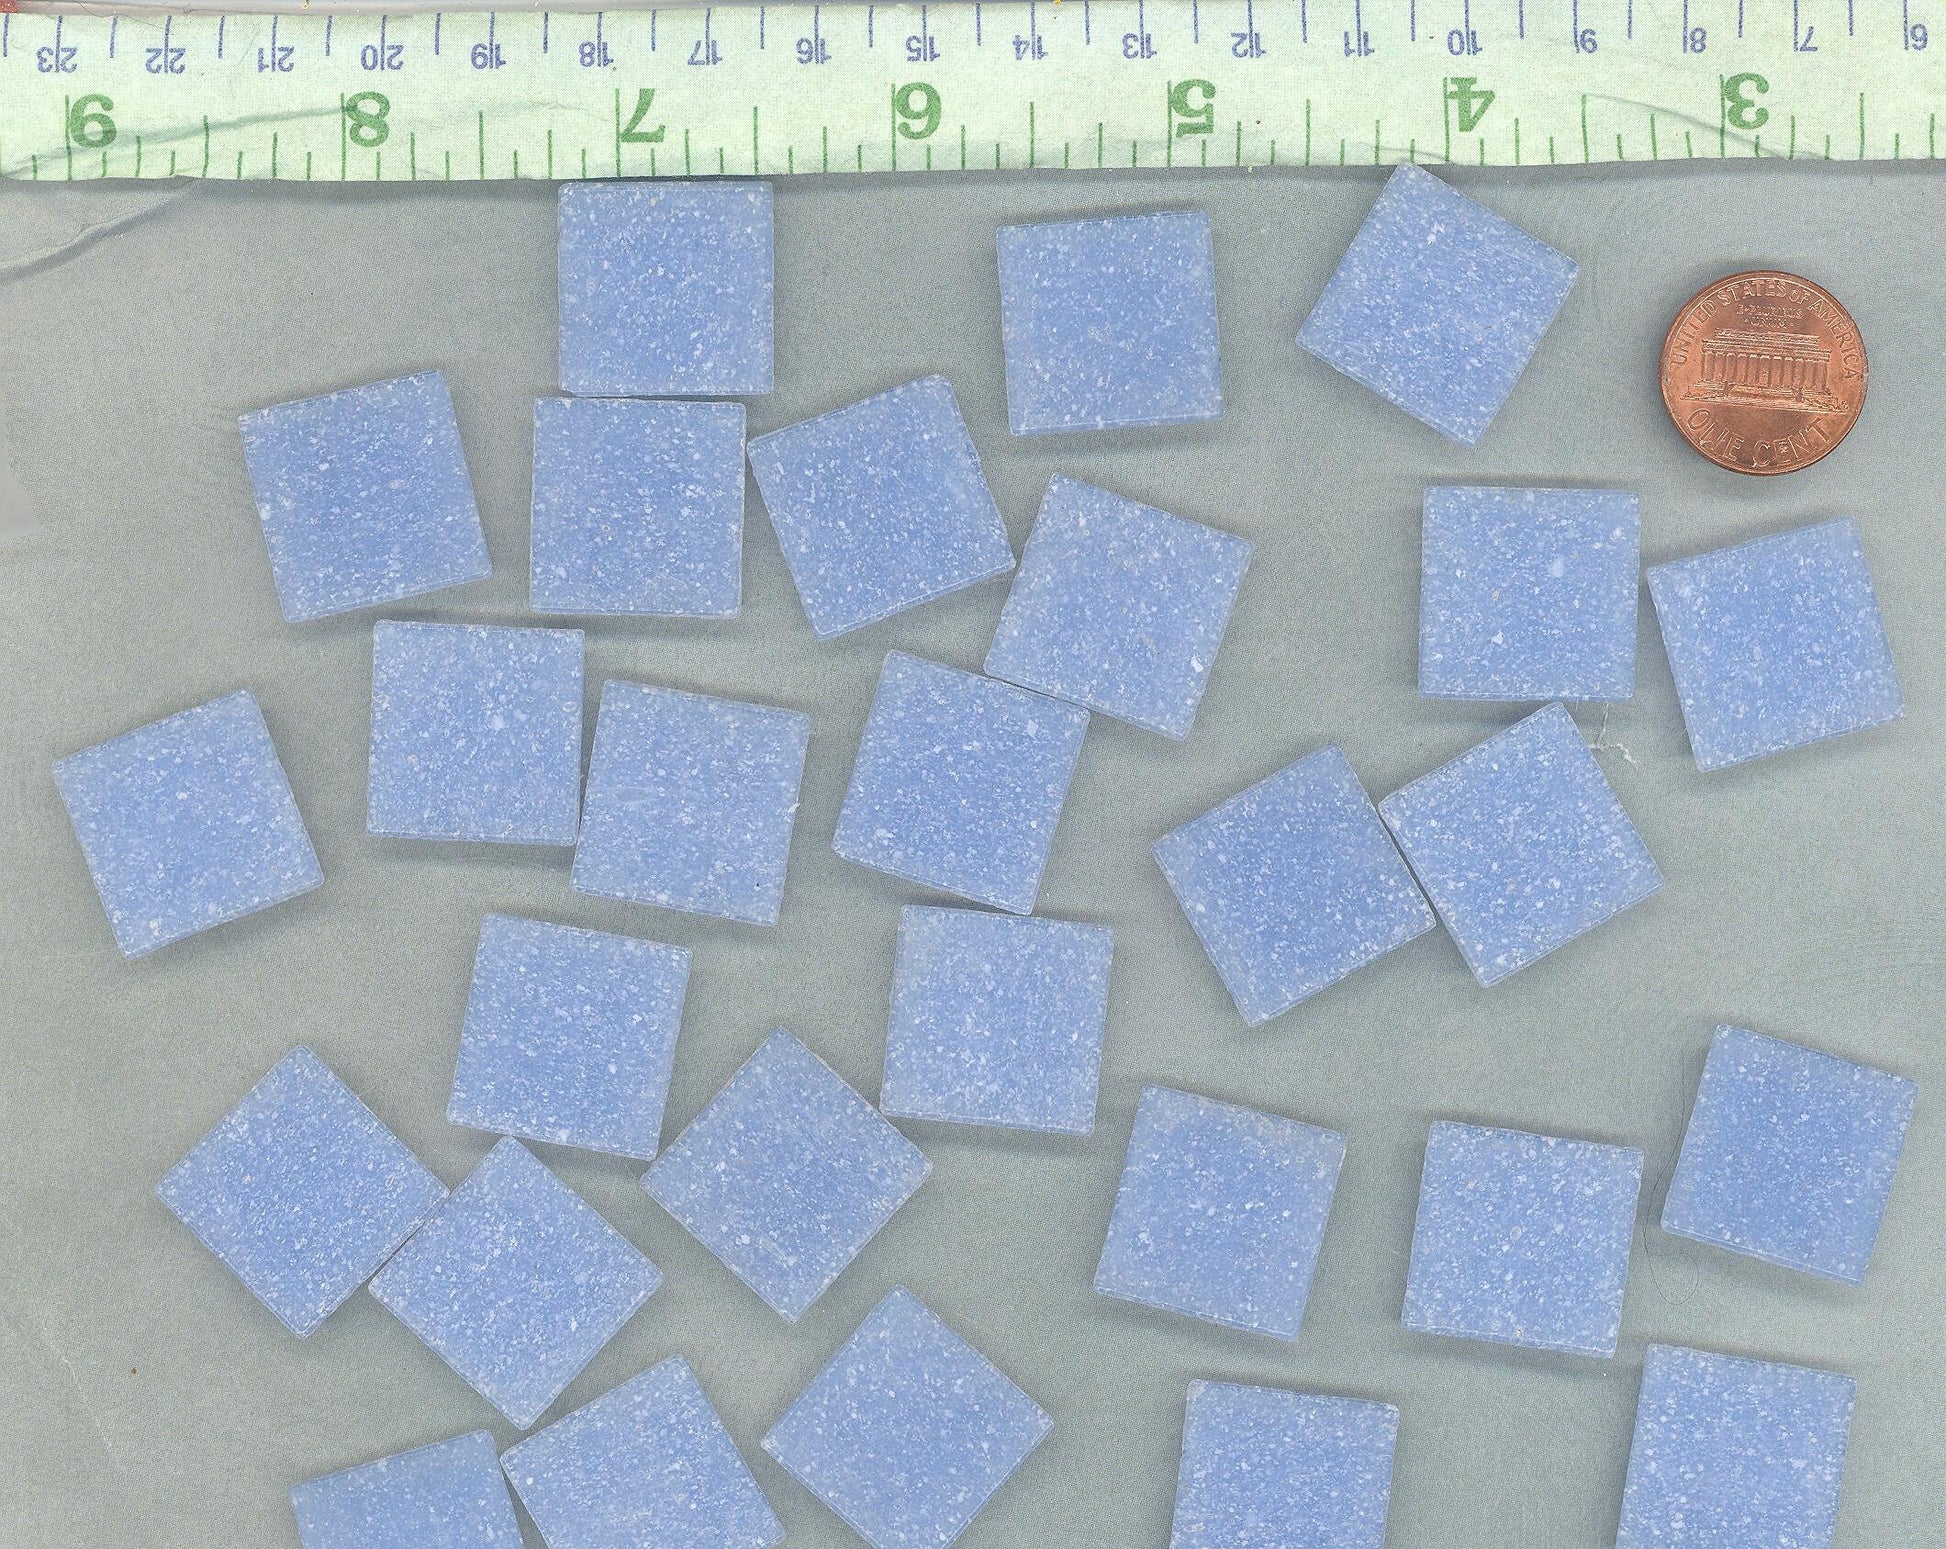 Cloudy Blue Glass Mosaic Tiles Squares - 20mm - Half Pound of Light Blue Vitreous Glass Tiles for Craft Projects - Approx 75 Tiles